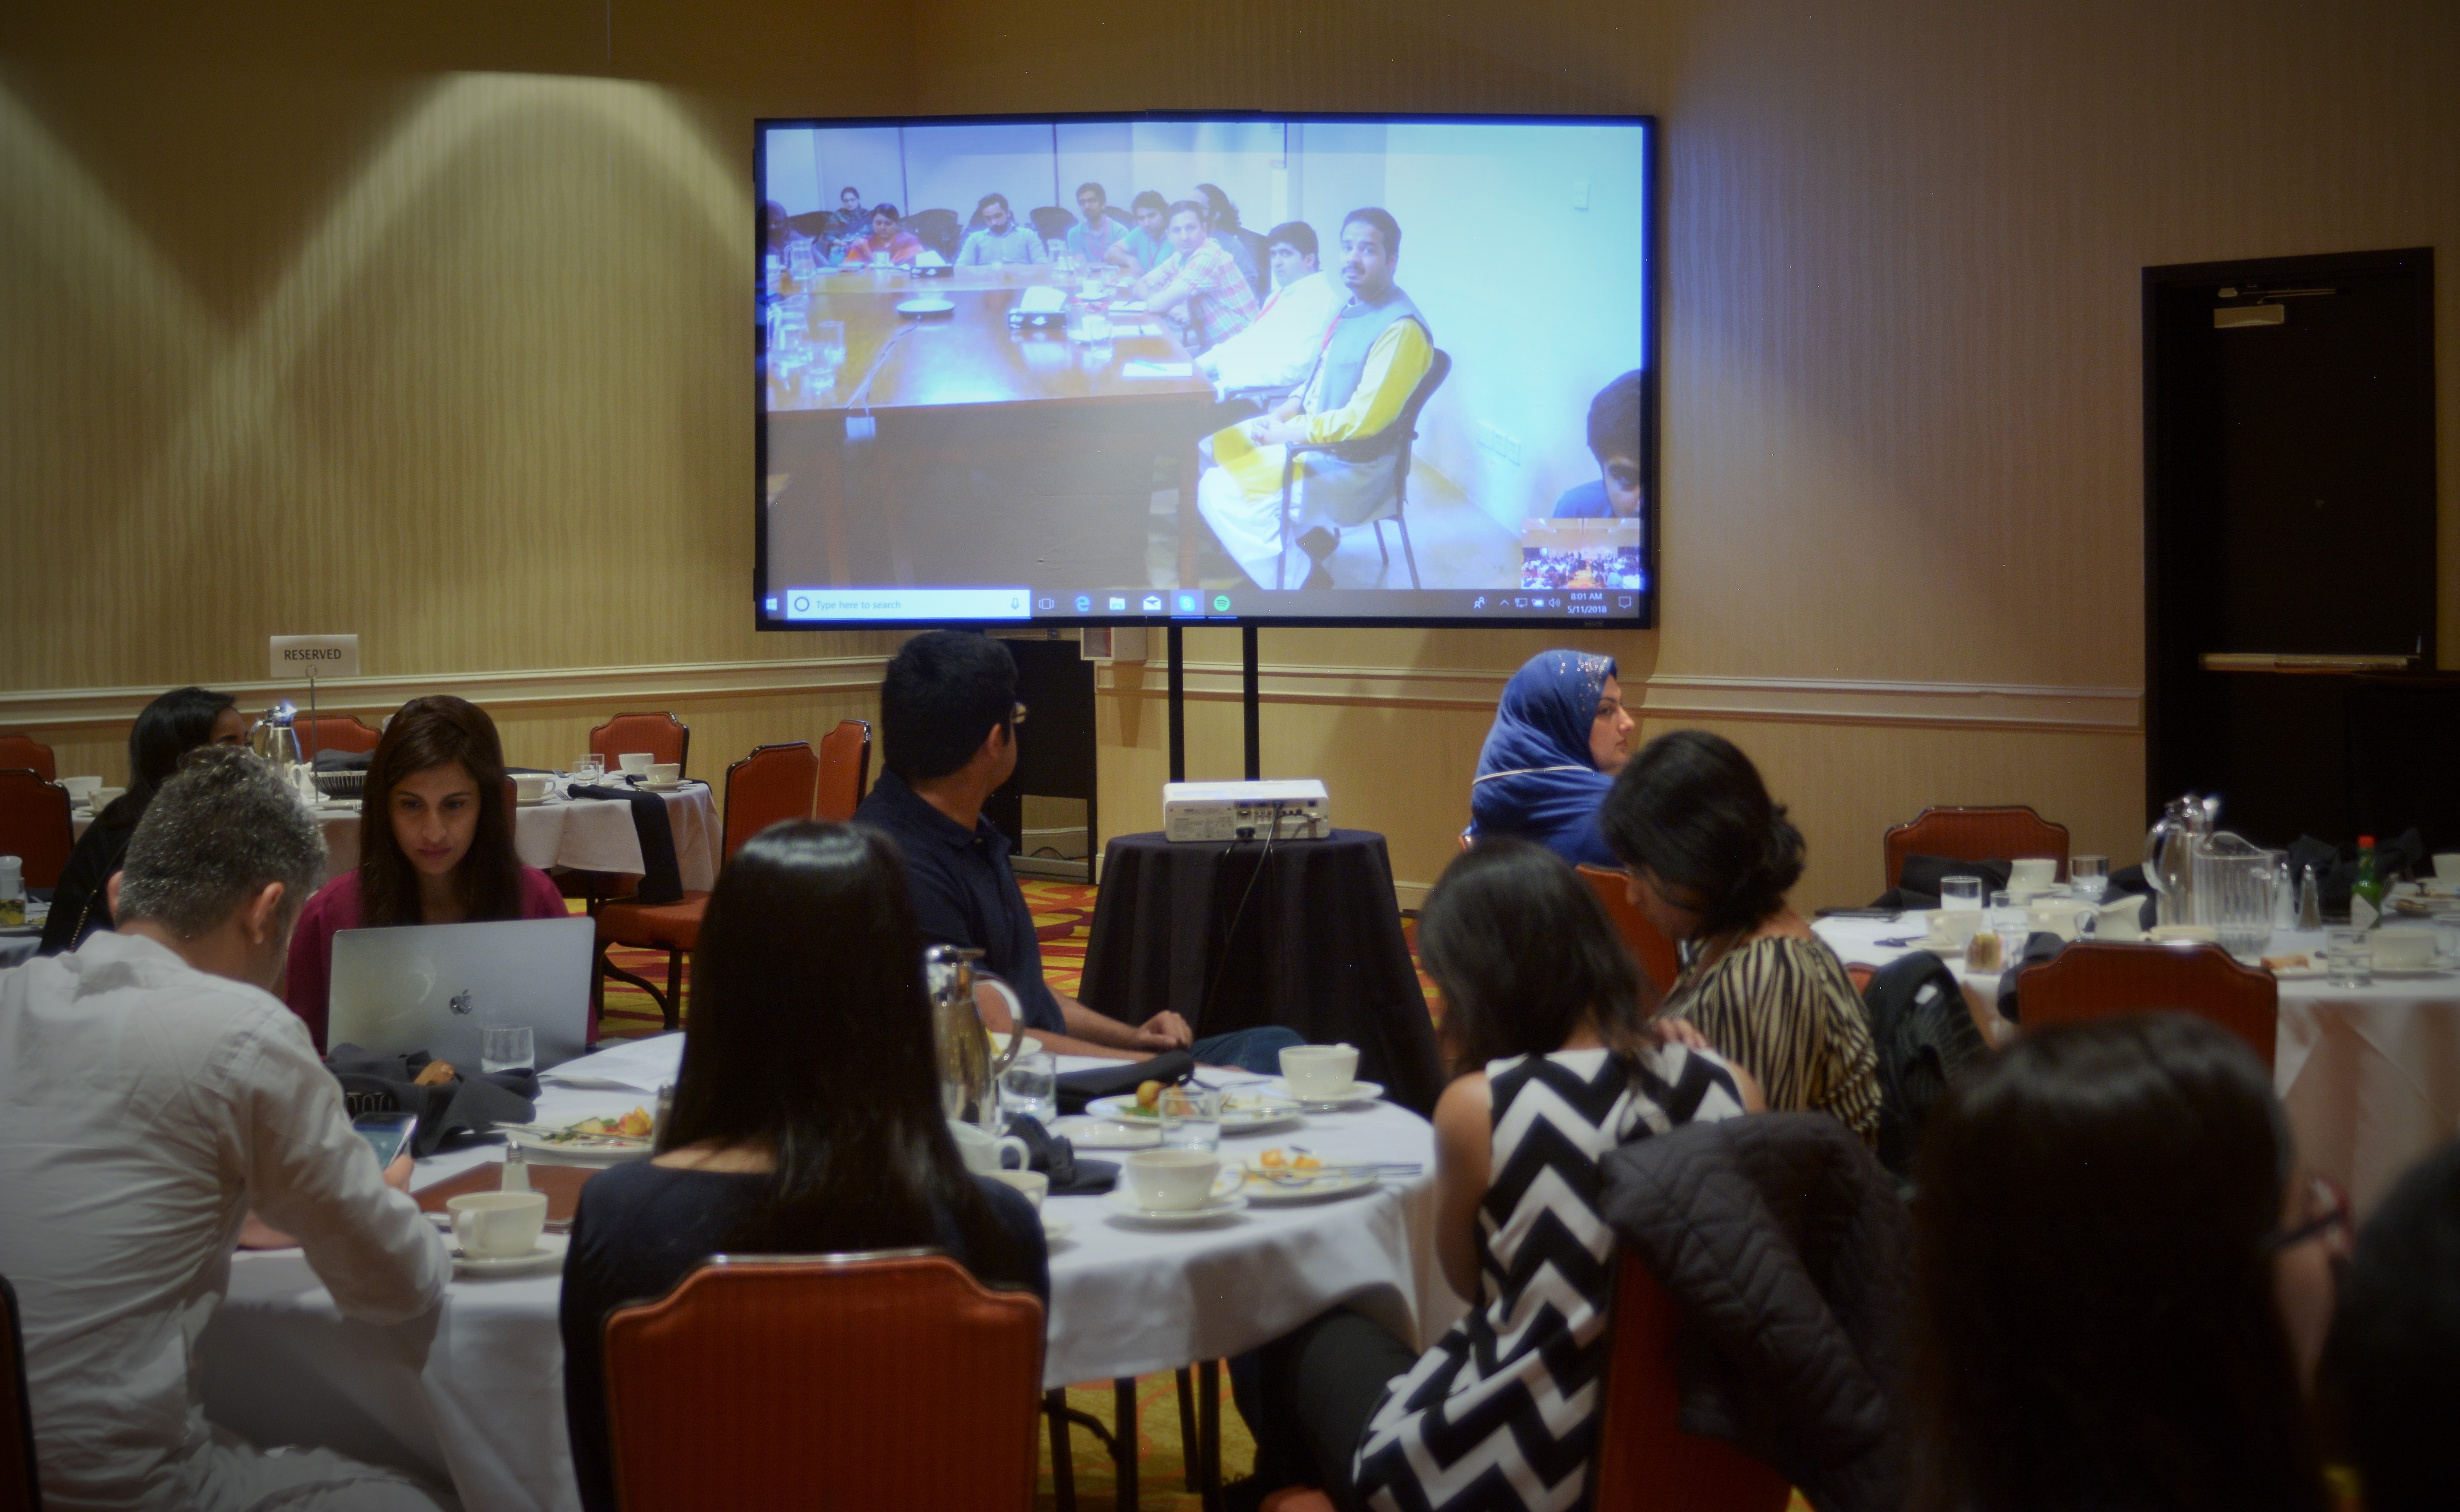 Fulbright alumni engage with grantees through direct video conference